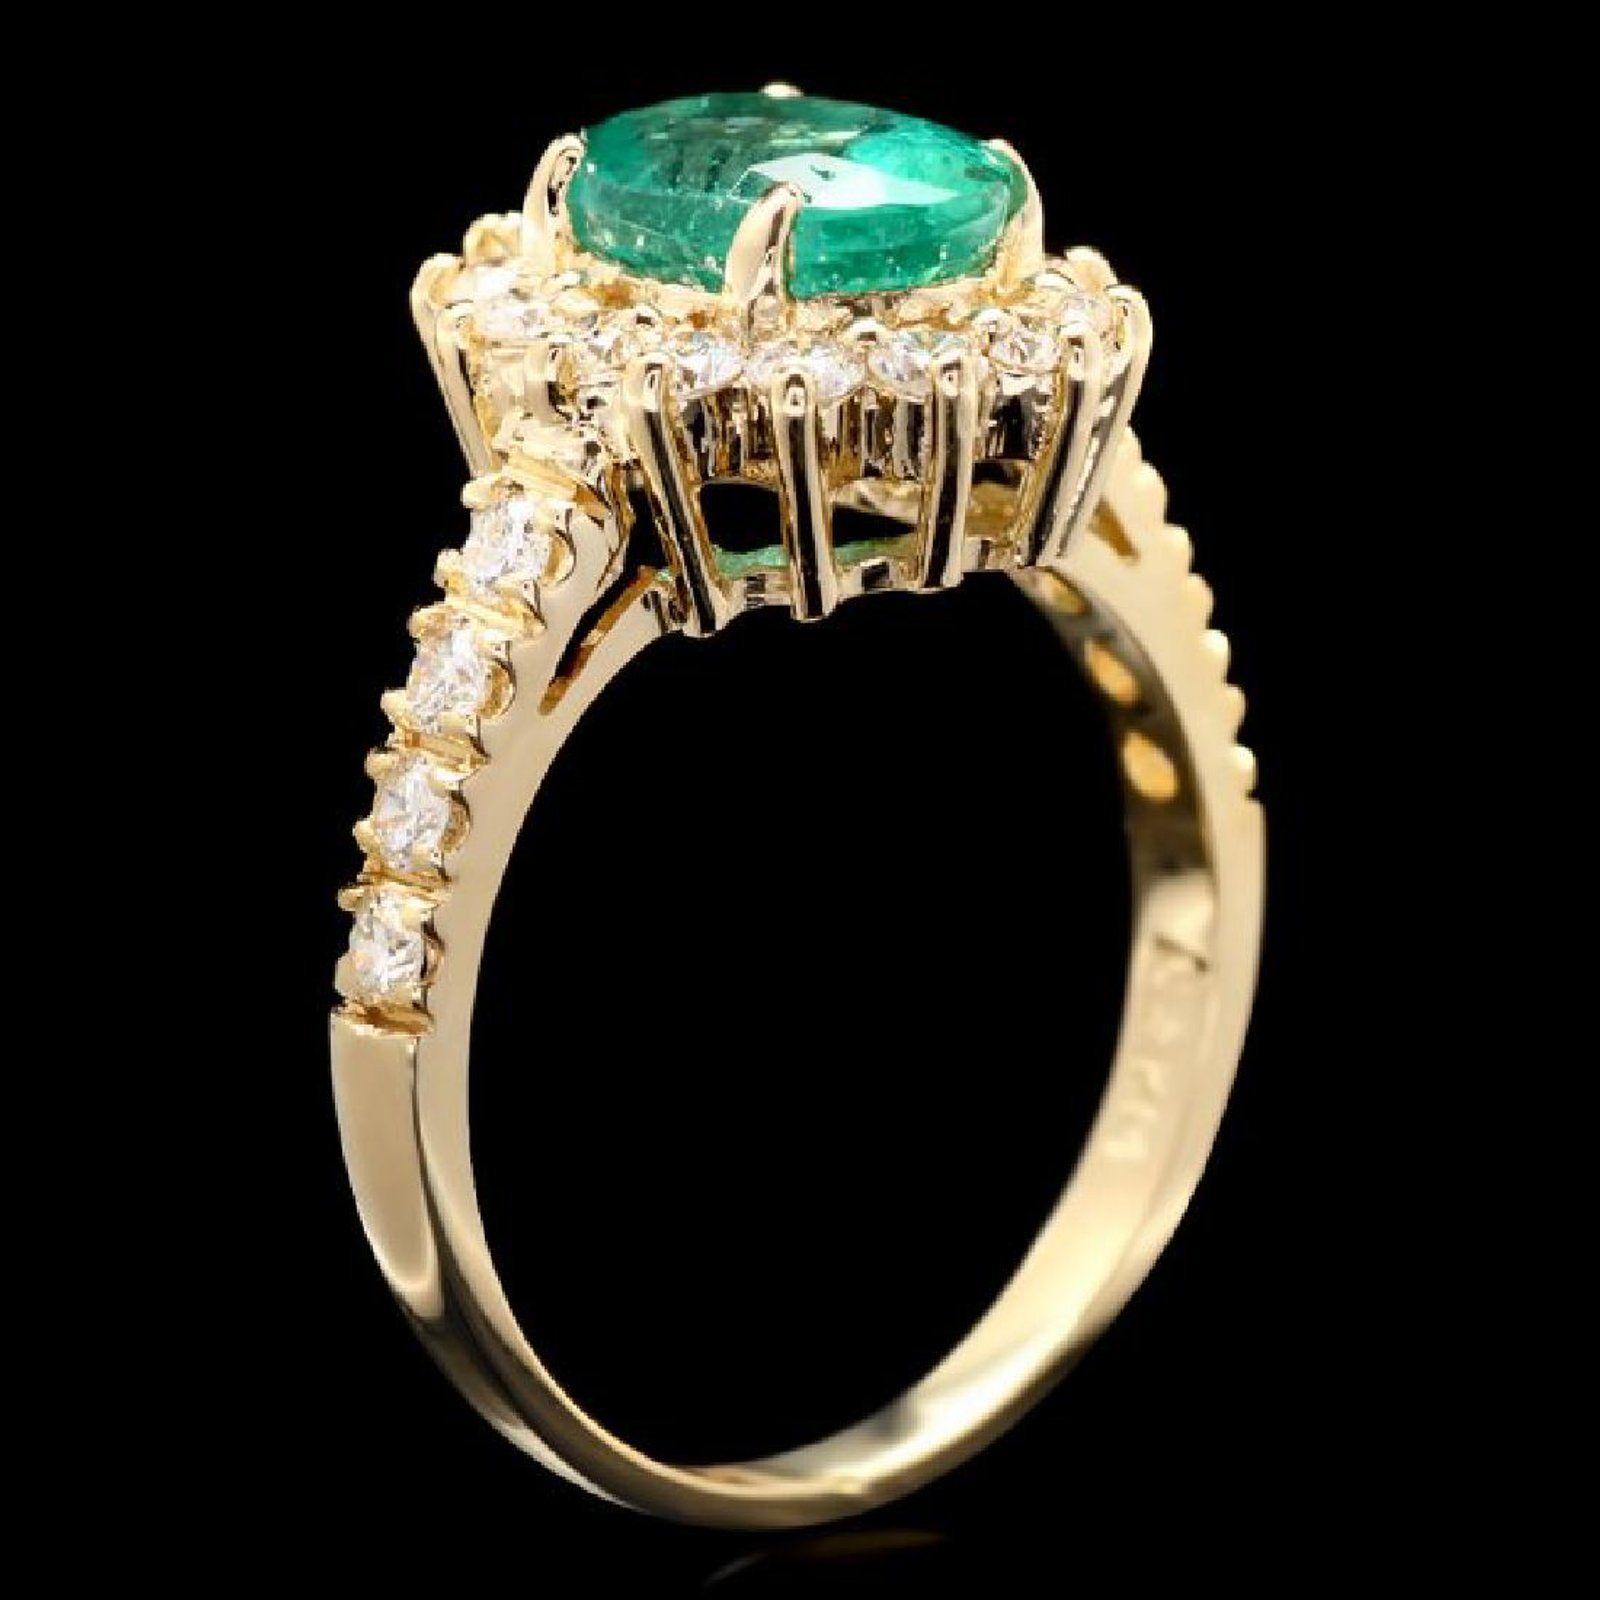 2.50 Carats Natural Emerald and Diamond 14K Solid Yellow Gold Ring

Total Natural Oval Green Emerald Weight is: Approx. 1.90 Carats (Emerald Treatment: Oiling)

Emerald Measures: 9.00 x 7.00mm

Natural Round Diamonds Weight: Approx. 0.60 Carats